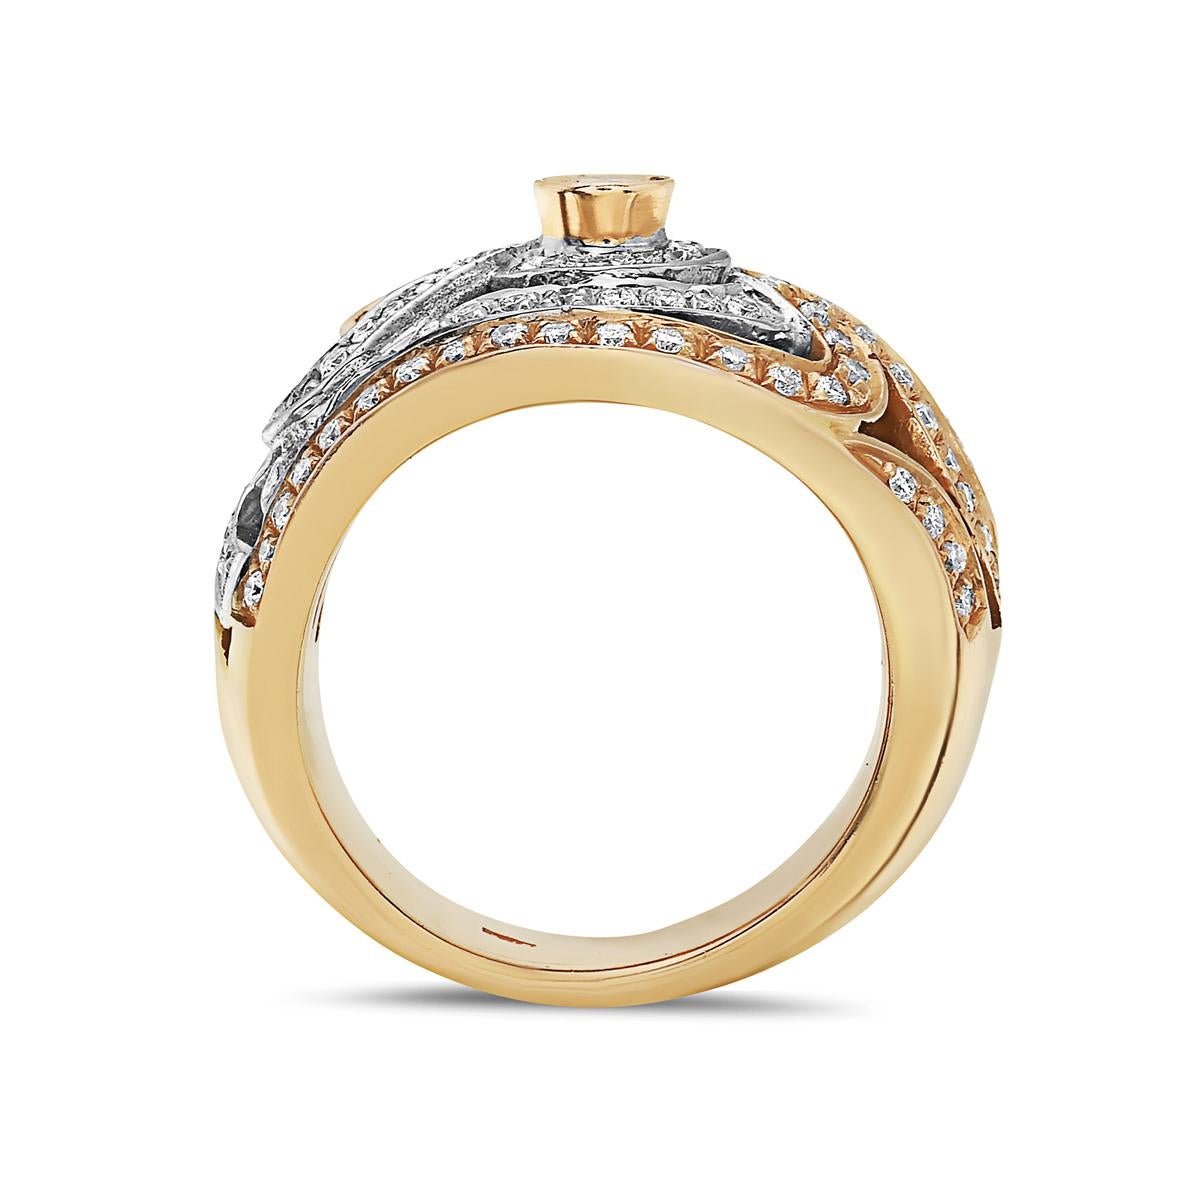 This statement cocktail ring features 0.88 carats of G VS round brilliant cut diamonds set in 18K white and rose gold. Size 7.25. 15.76g tw. Made in Italy. 